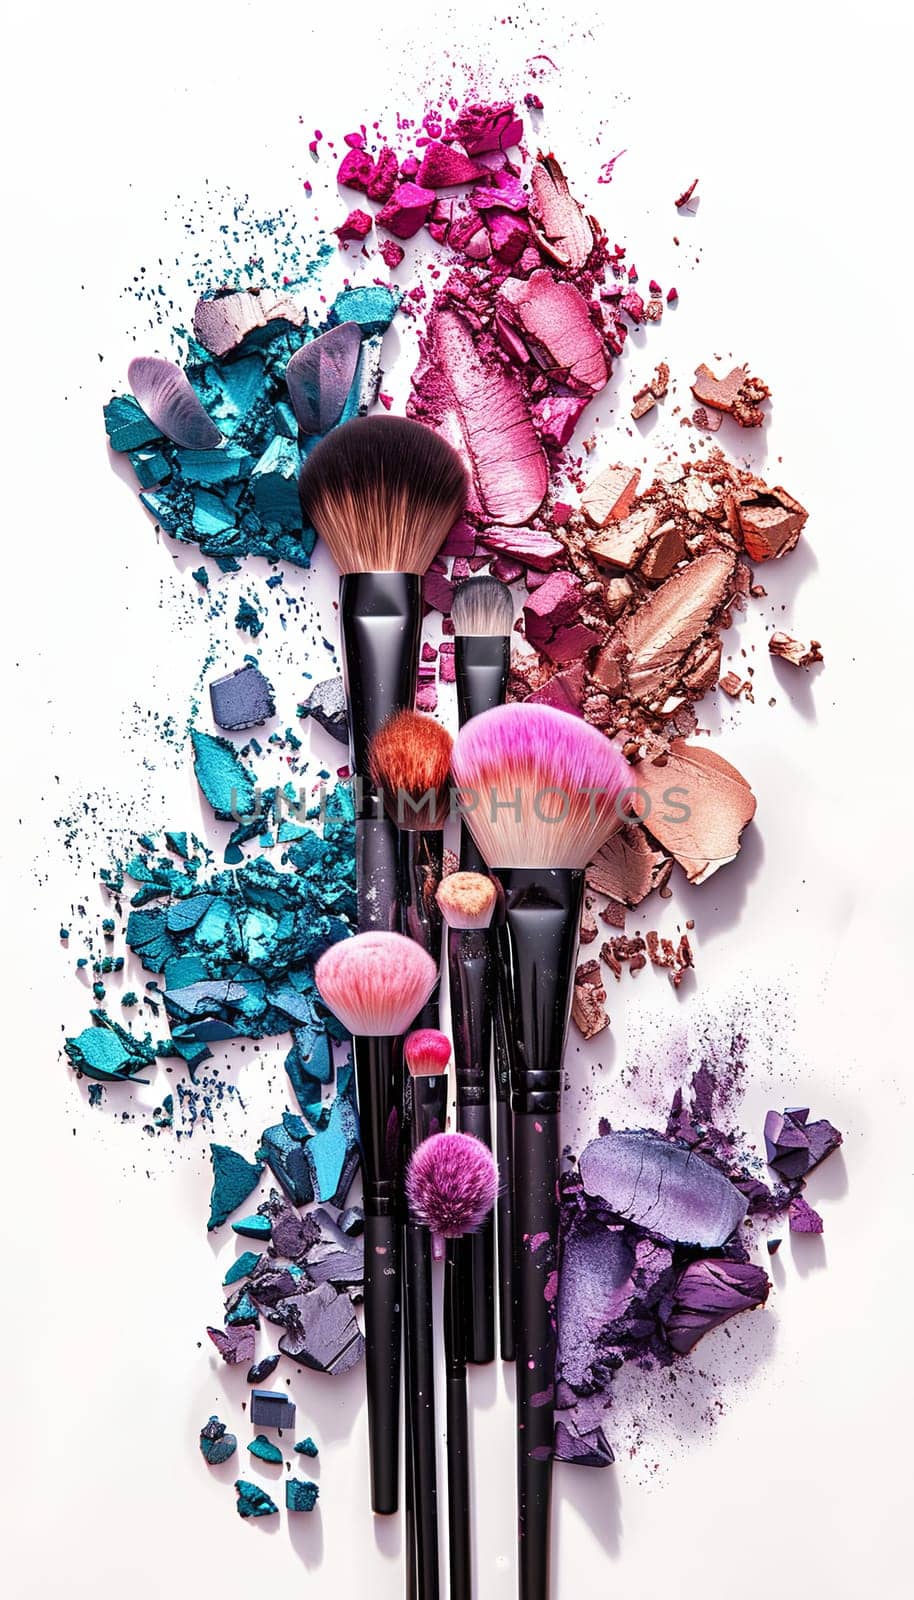 A close-up photo of several makeup brushes covered in eyeshadow and blush, with vibrant colors against a white background.